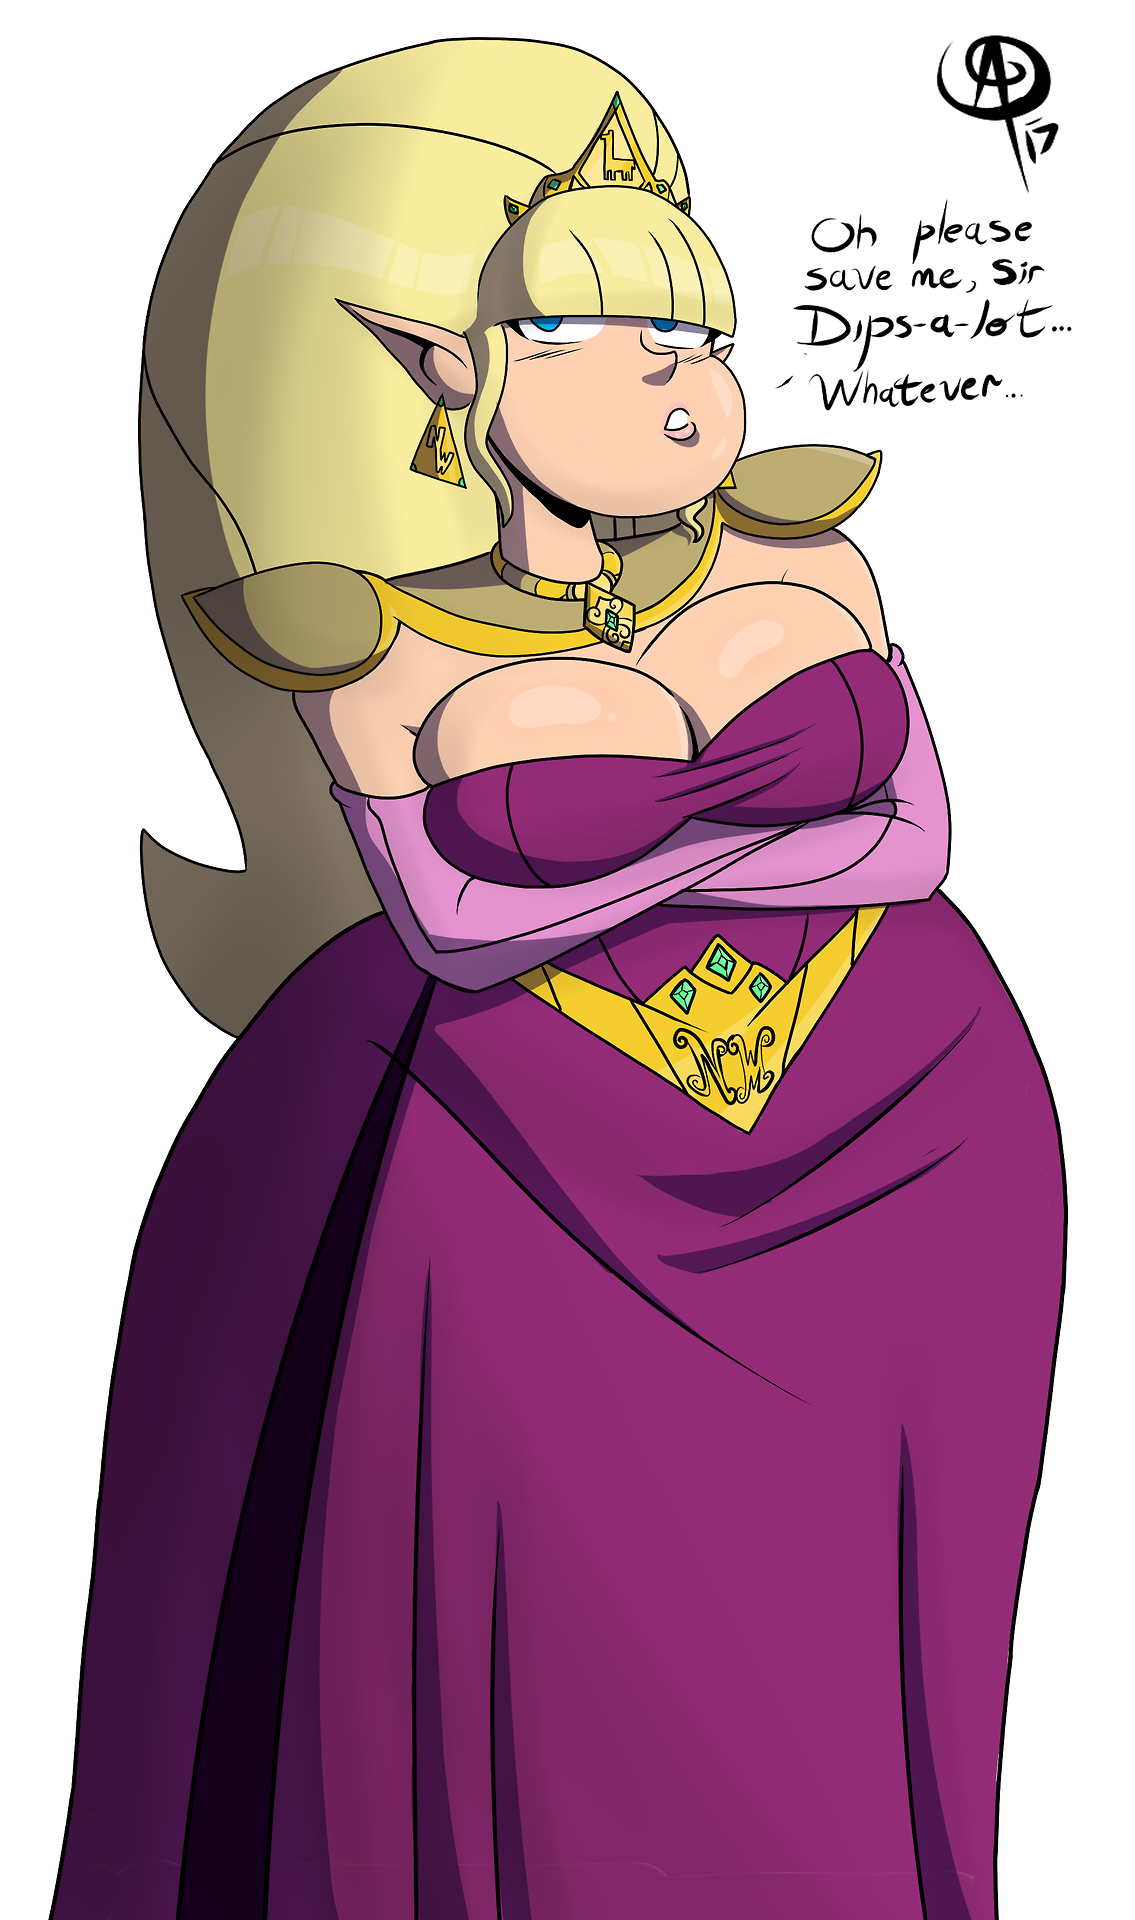 chillguydraws: Commission for @closingstraw97 for a design for Princess Thiccifica